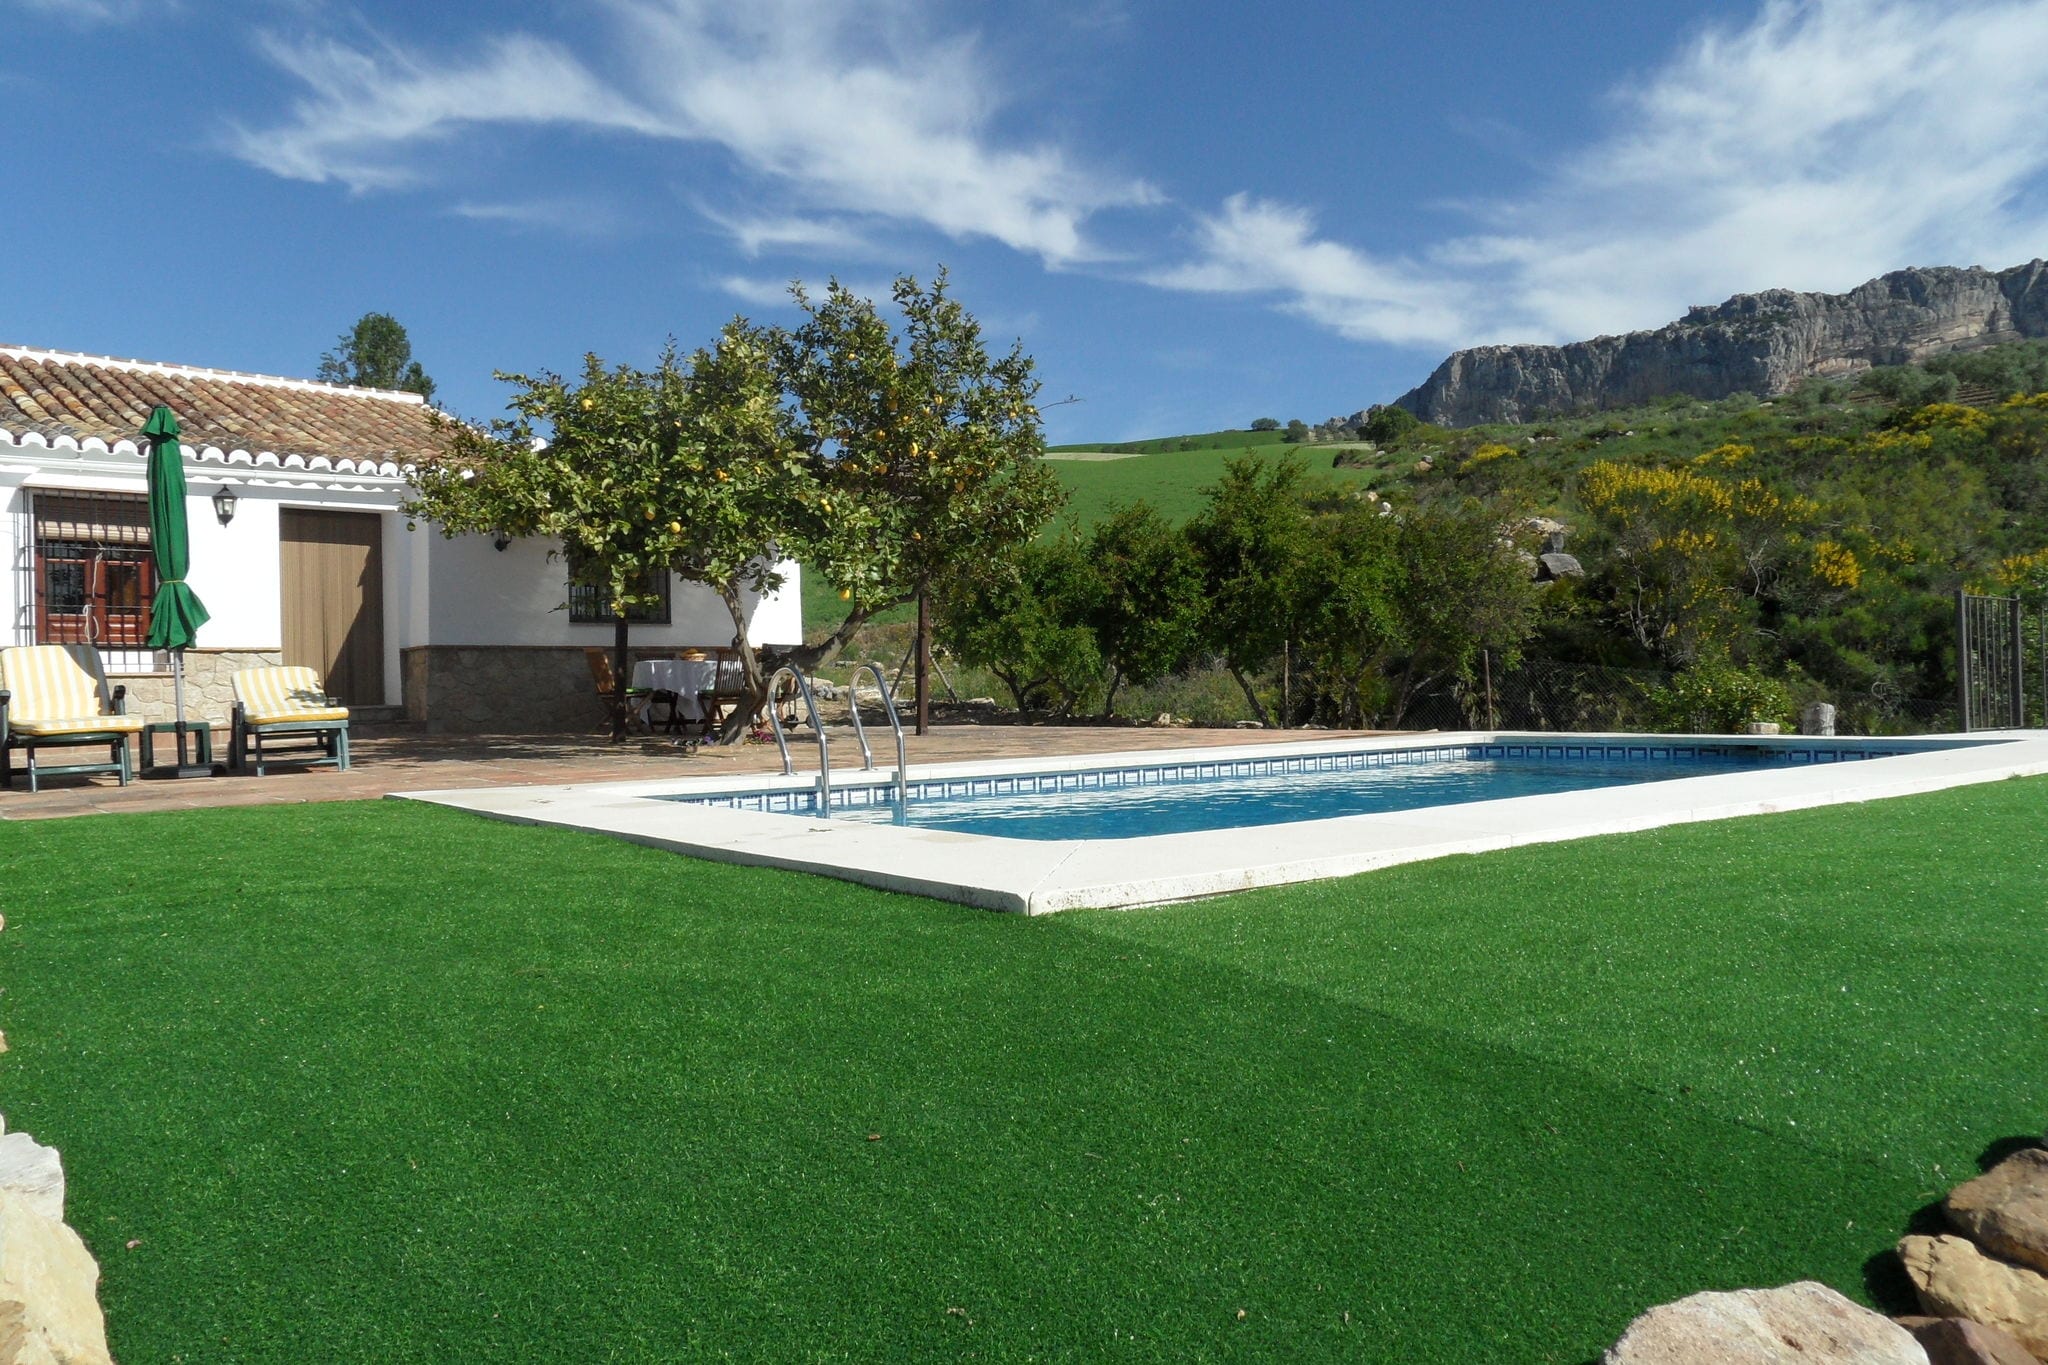 Cottage in Andalusien mit Schwimmbad